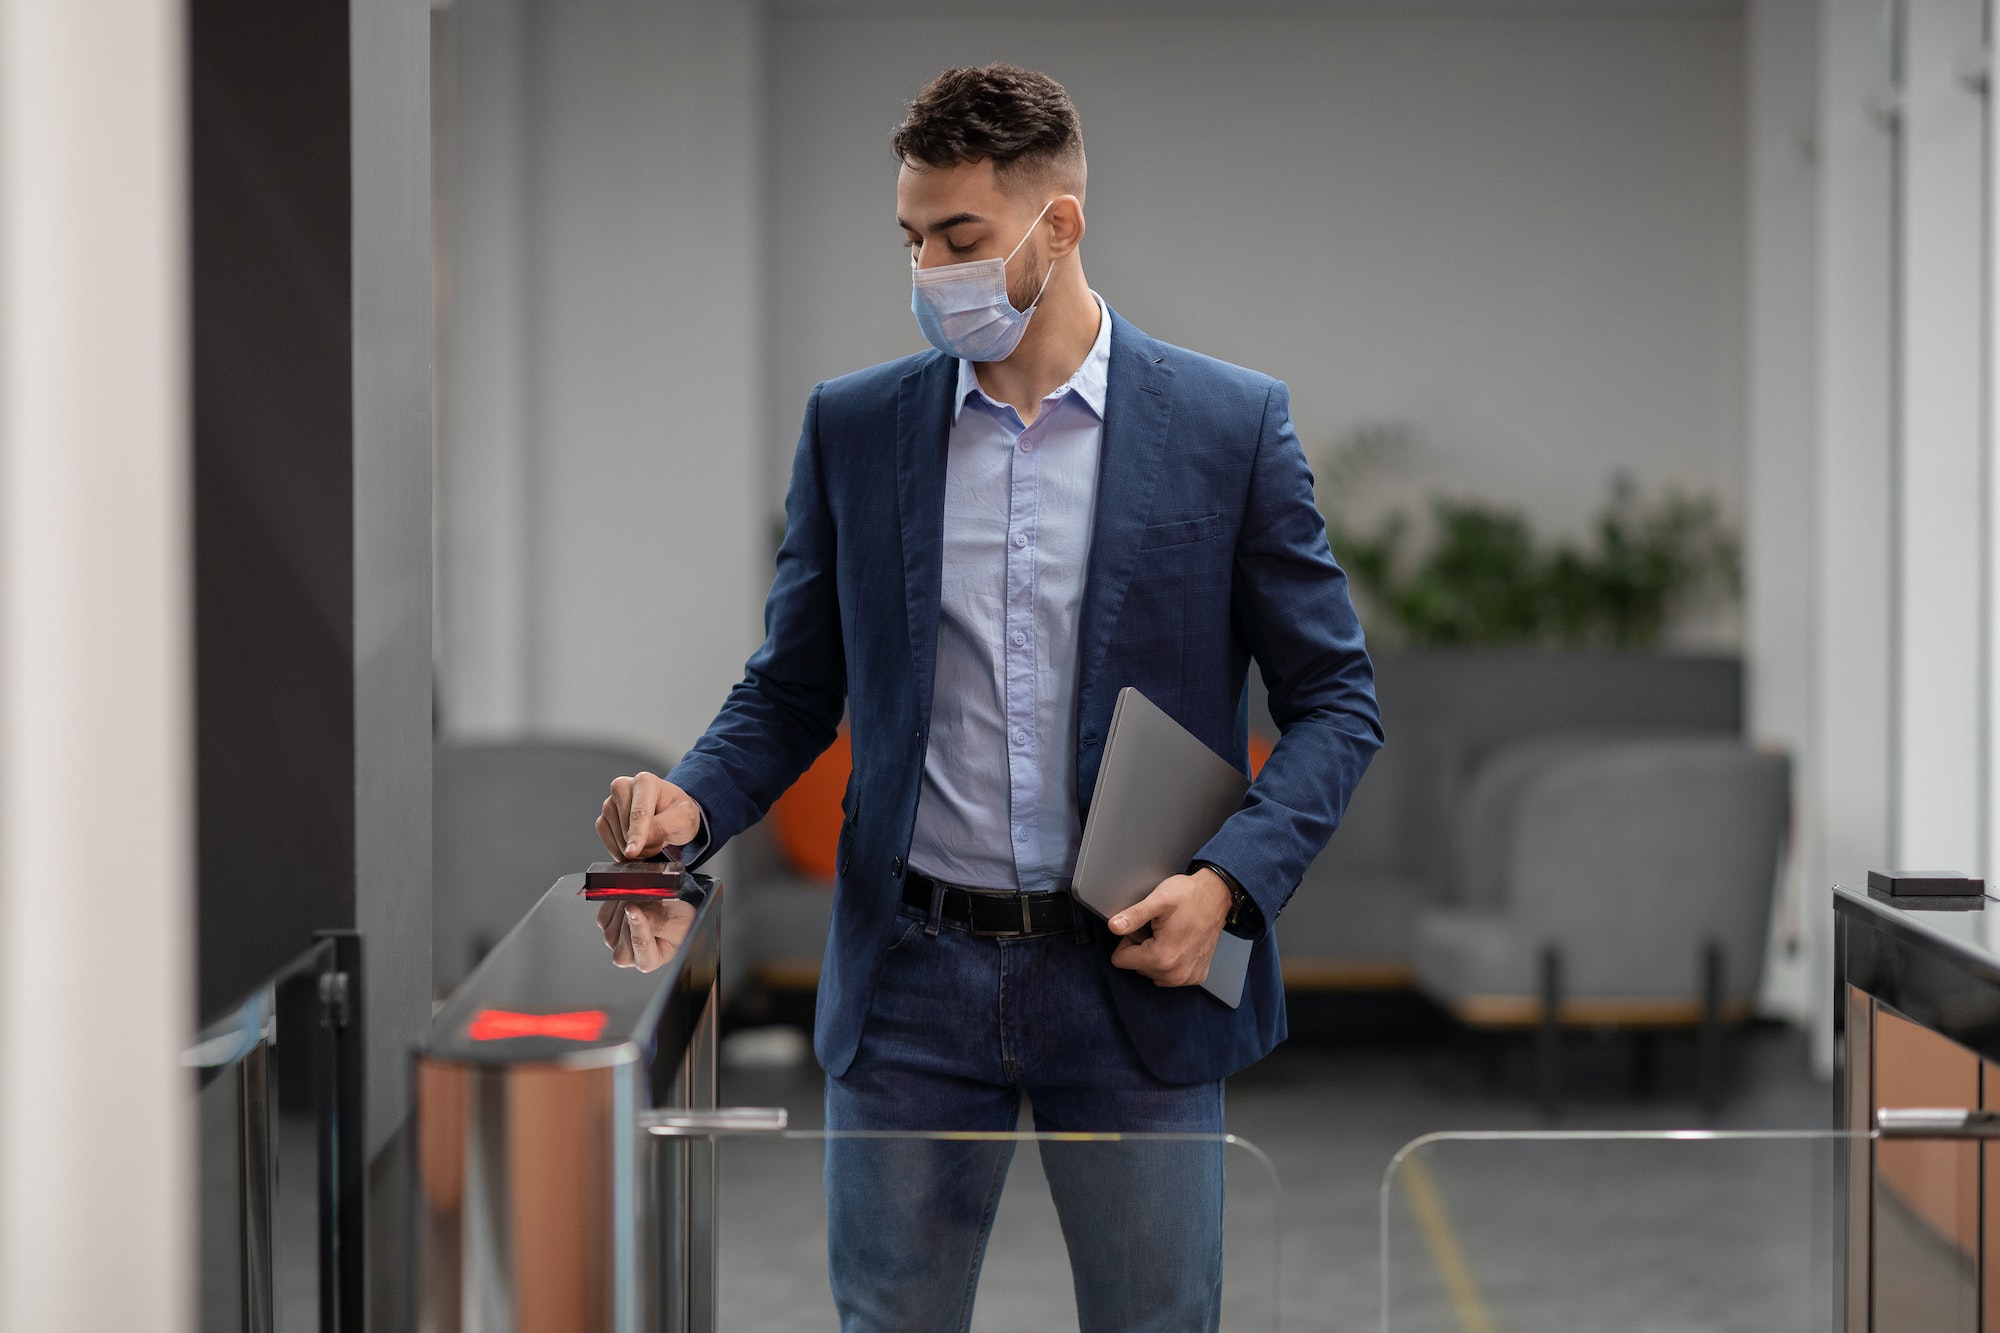 Arab guy in face mask employee entering security code